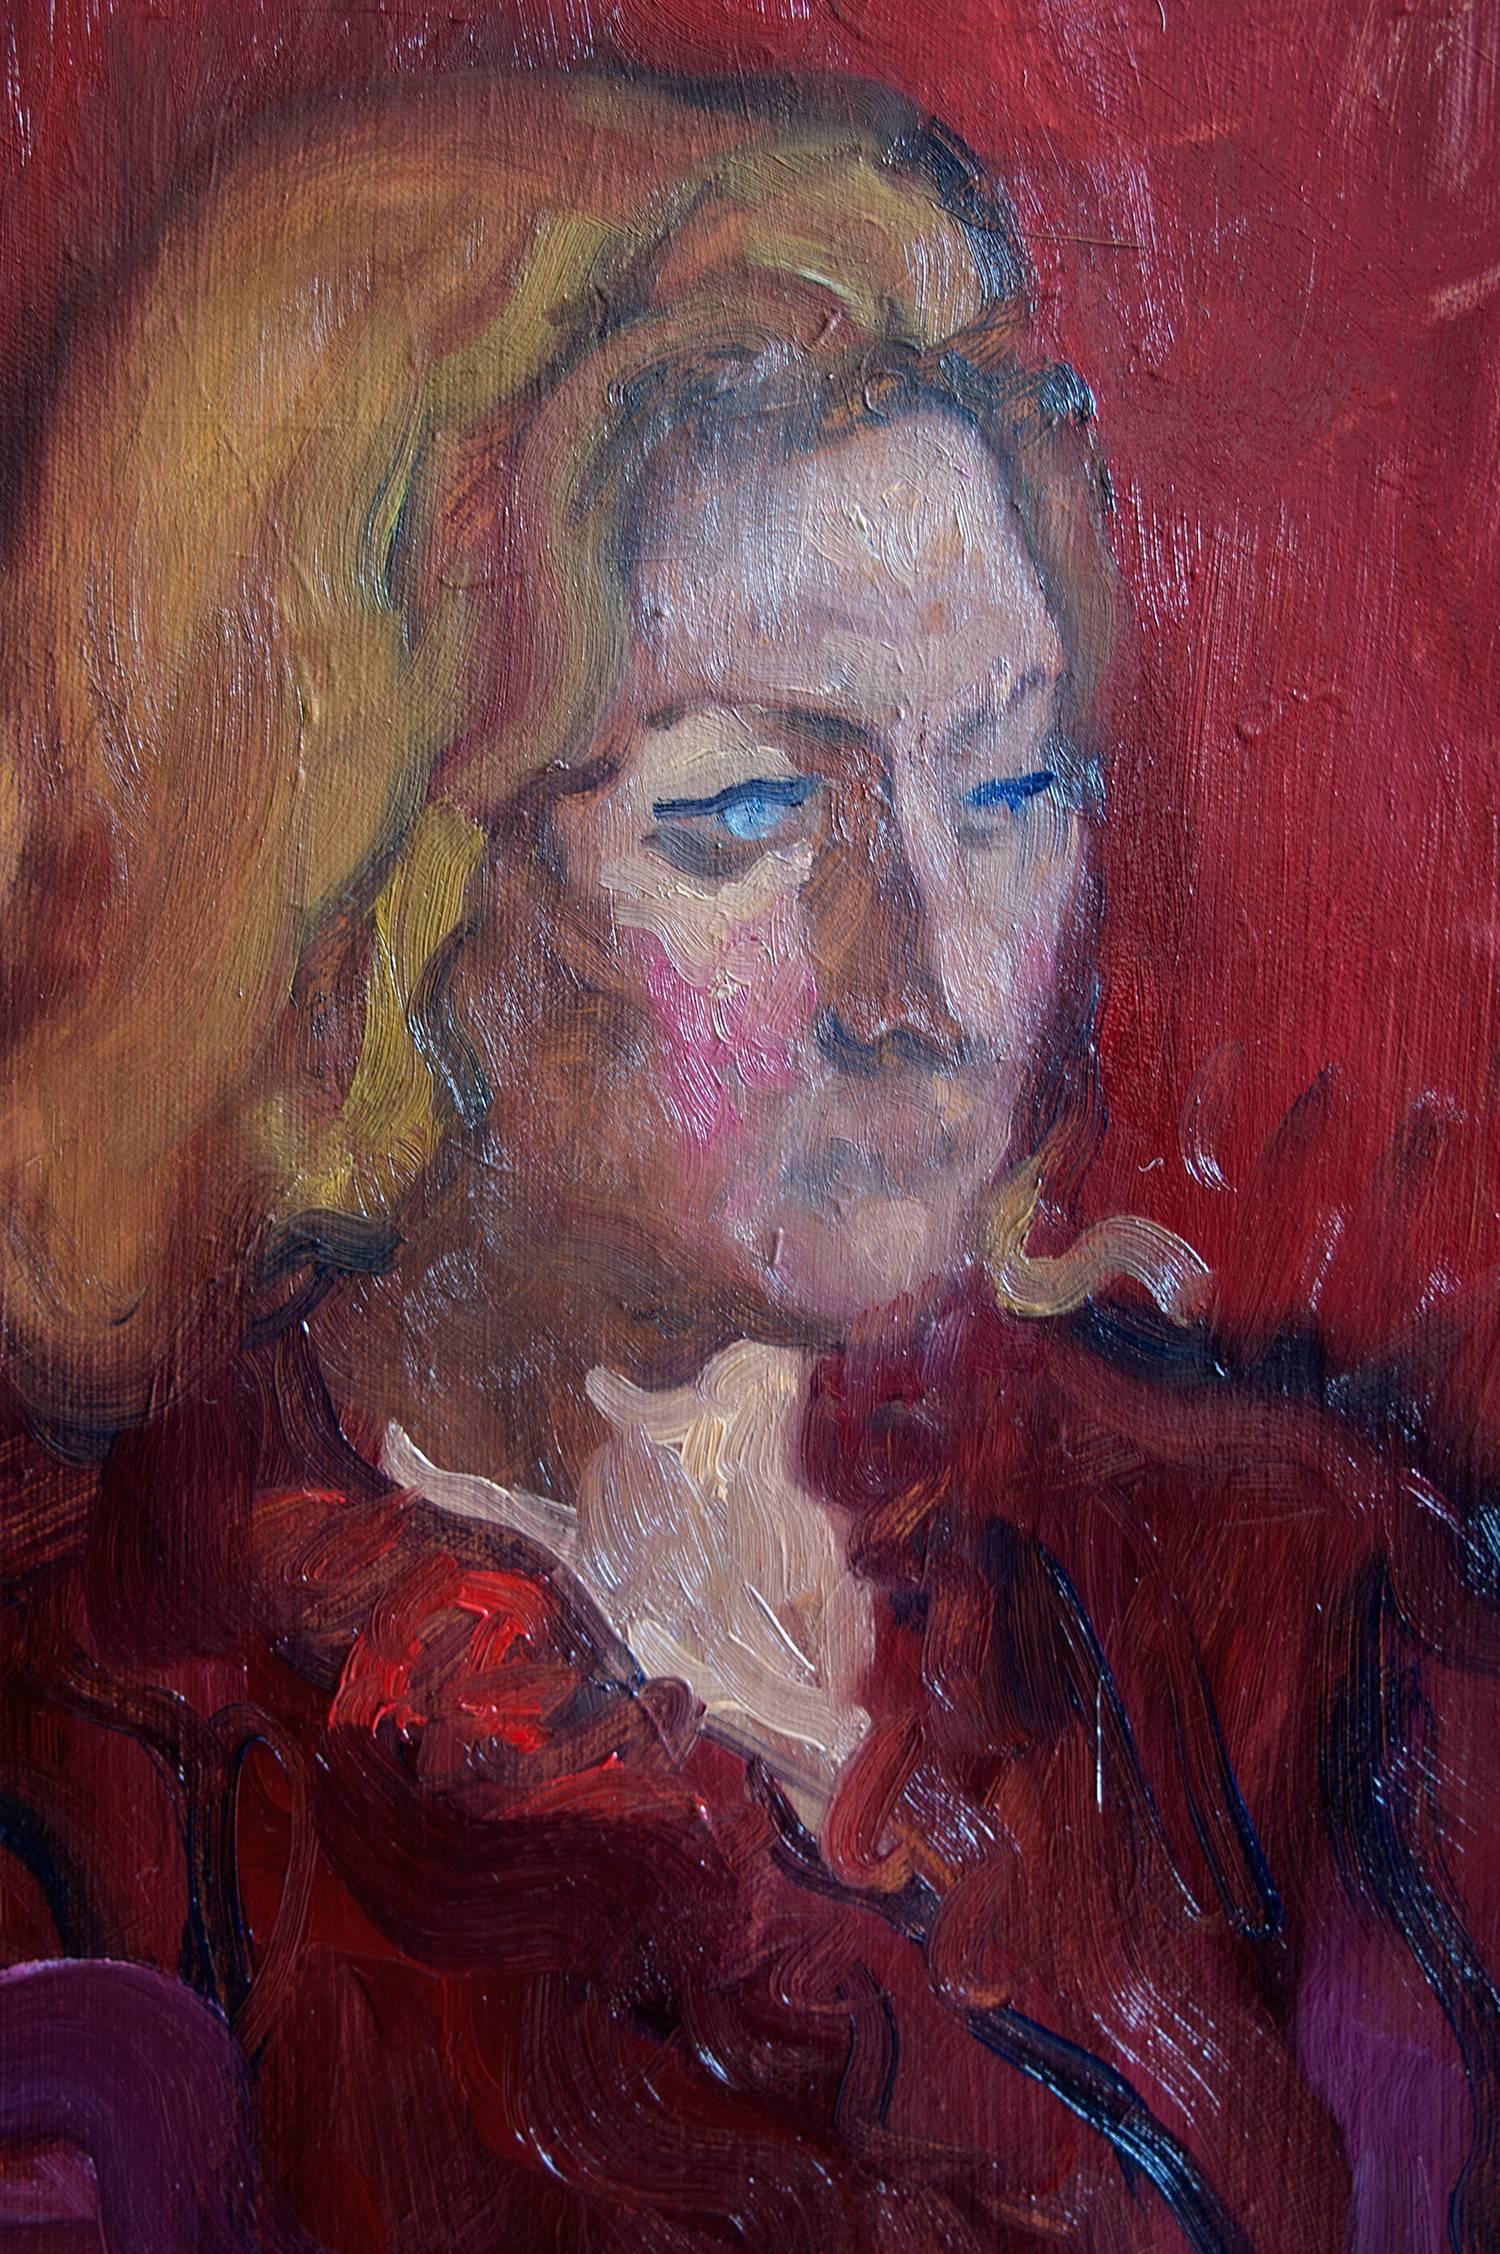 Title: Woman in Red
Artist: Elina Arbidane (emerging contemporary impressionist painter), Latvia
Original alla prima hand-painted portrait of a woman in red
Oil paints on canvas
Not a print or copy, only one available
Signed on the